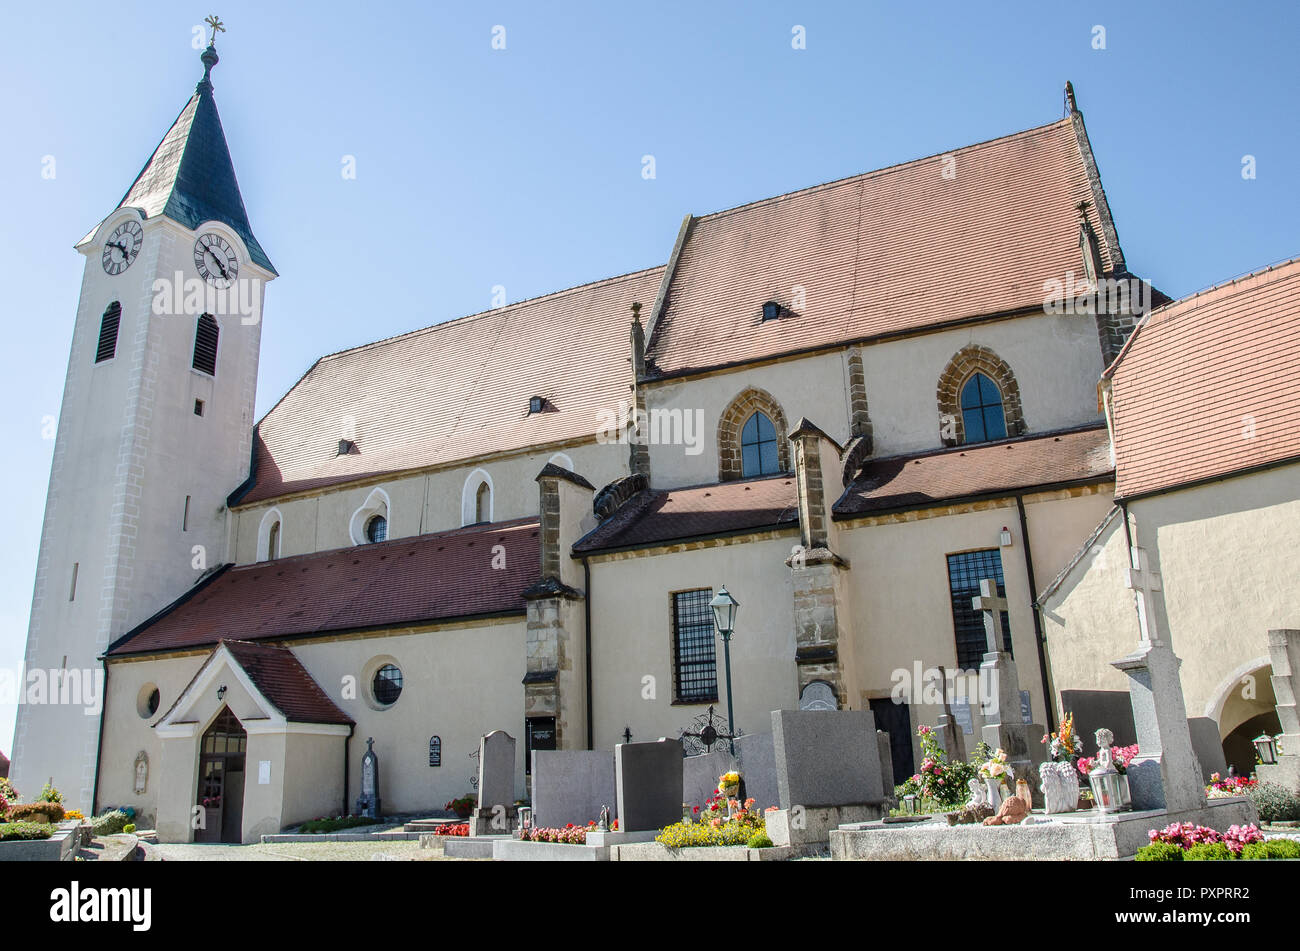 Ardagger, Lower Austria, market town in the district of Amstetten comprises the towns of Ardagger Markt and Stift Ardagger, north of Amstetten. Stock Photo